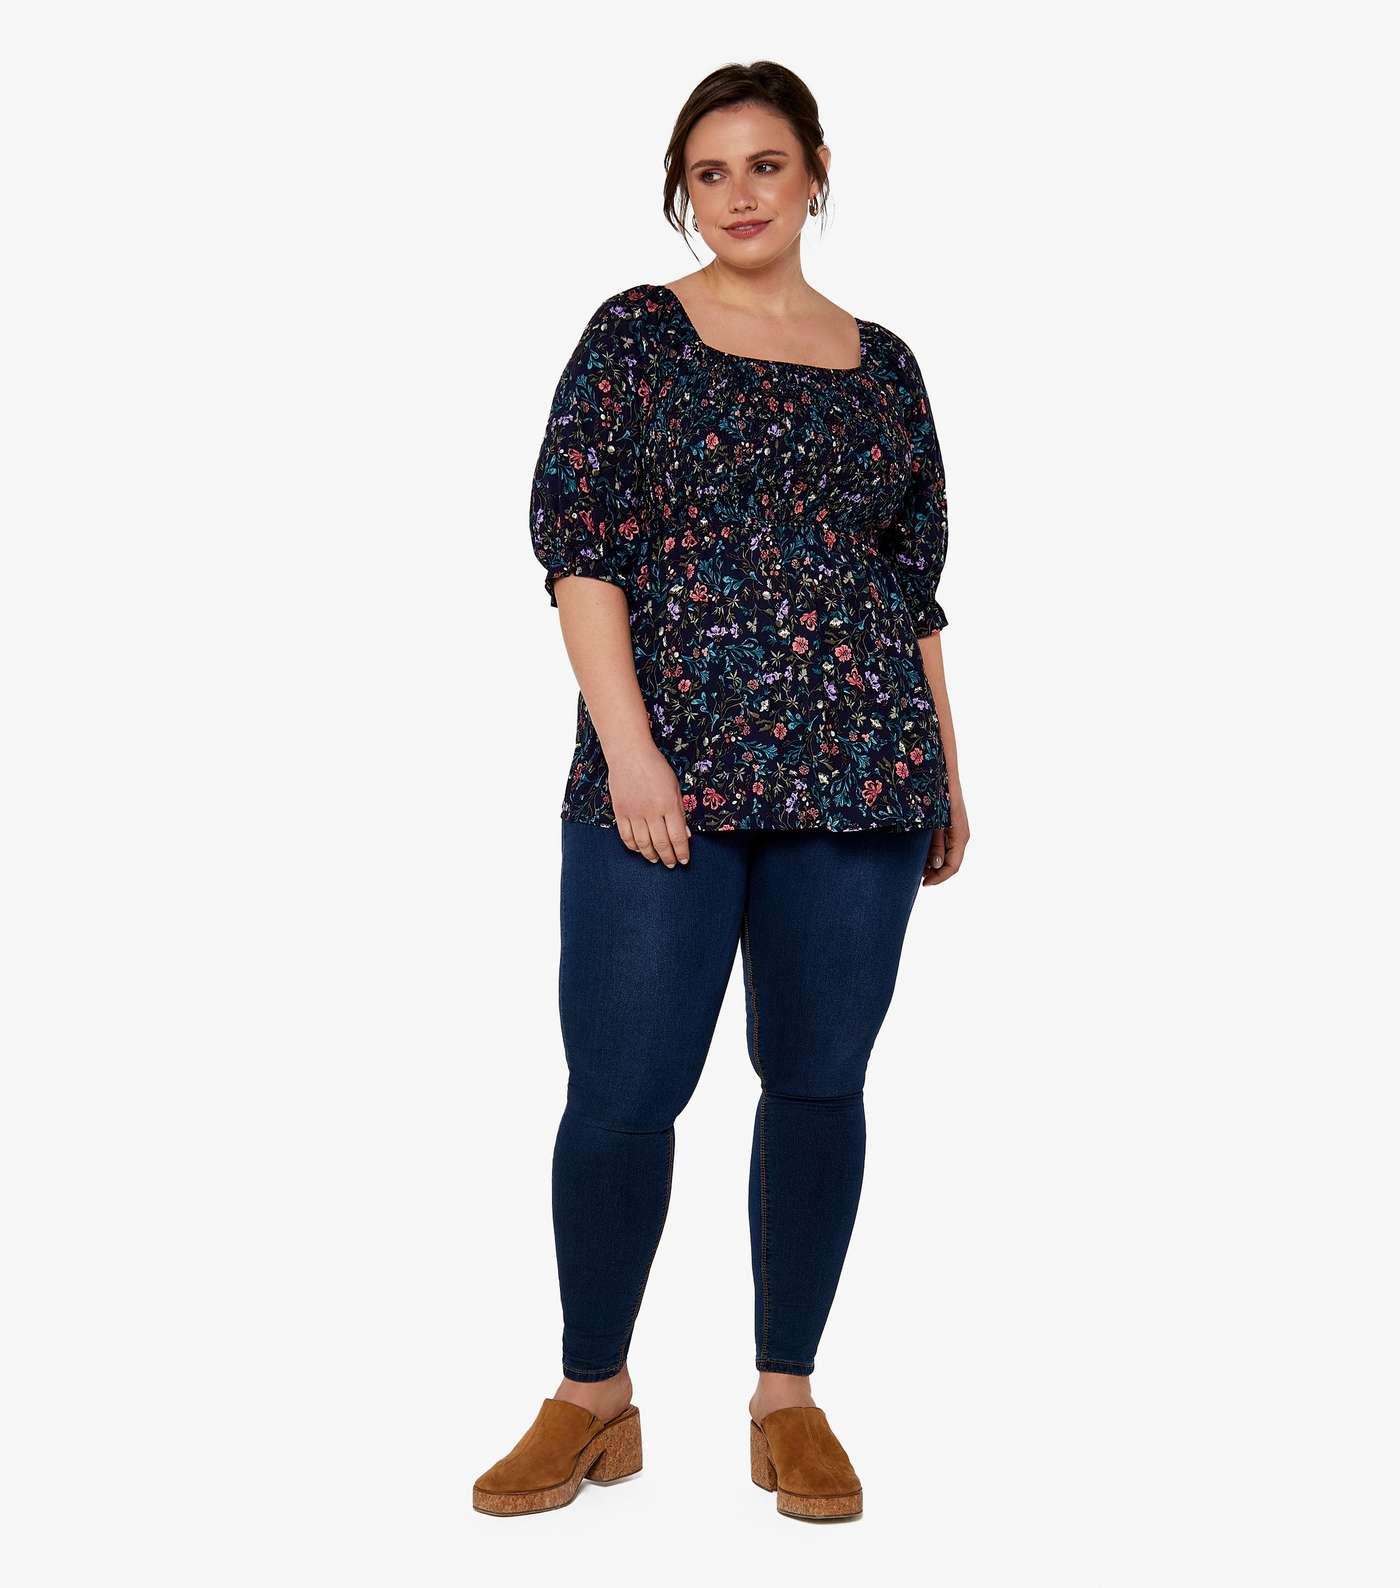 Apricot Curves Navy Floral Peplum Top Image 2